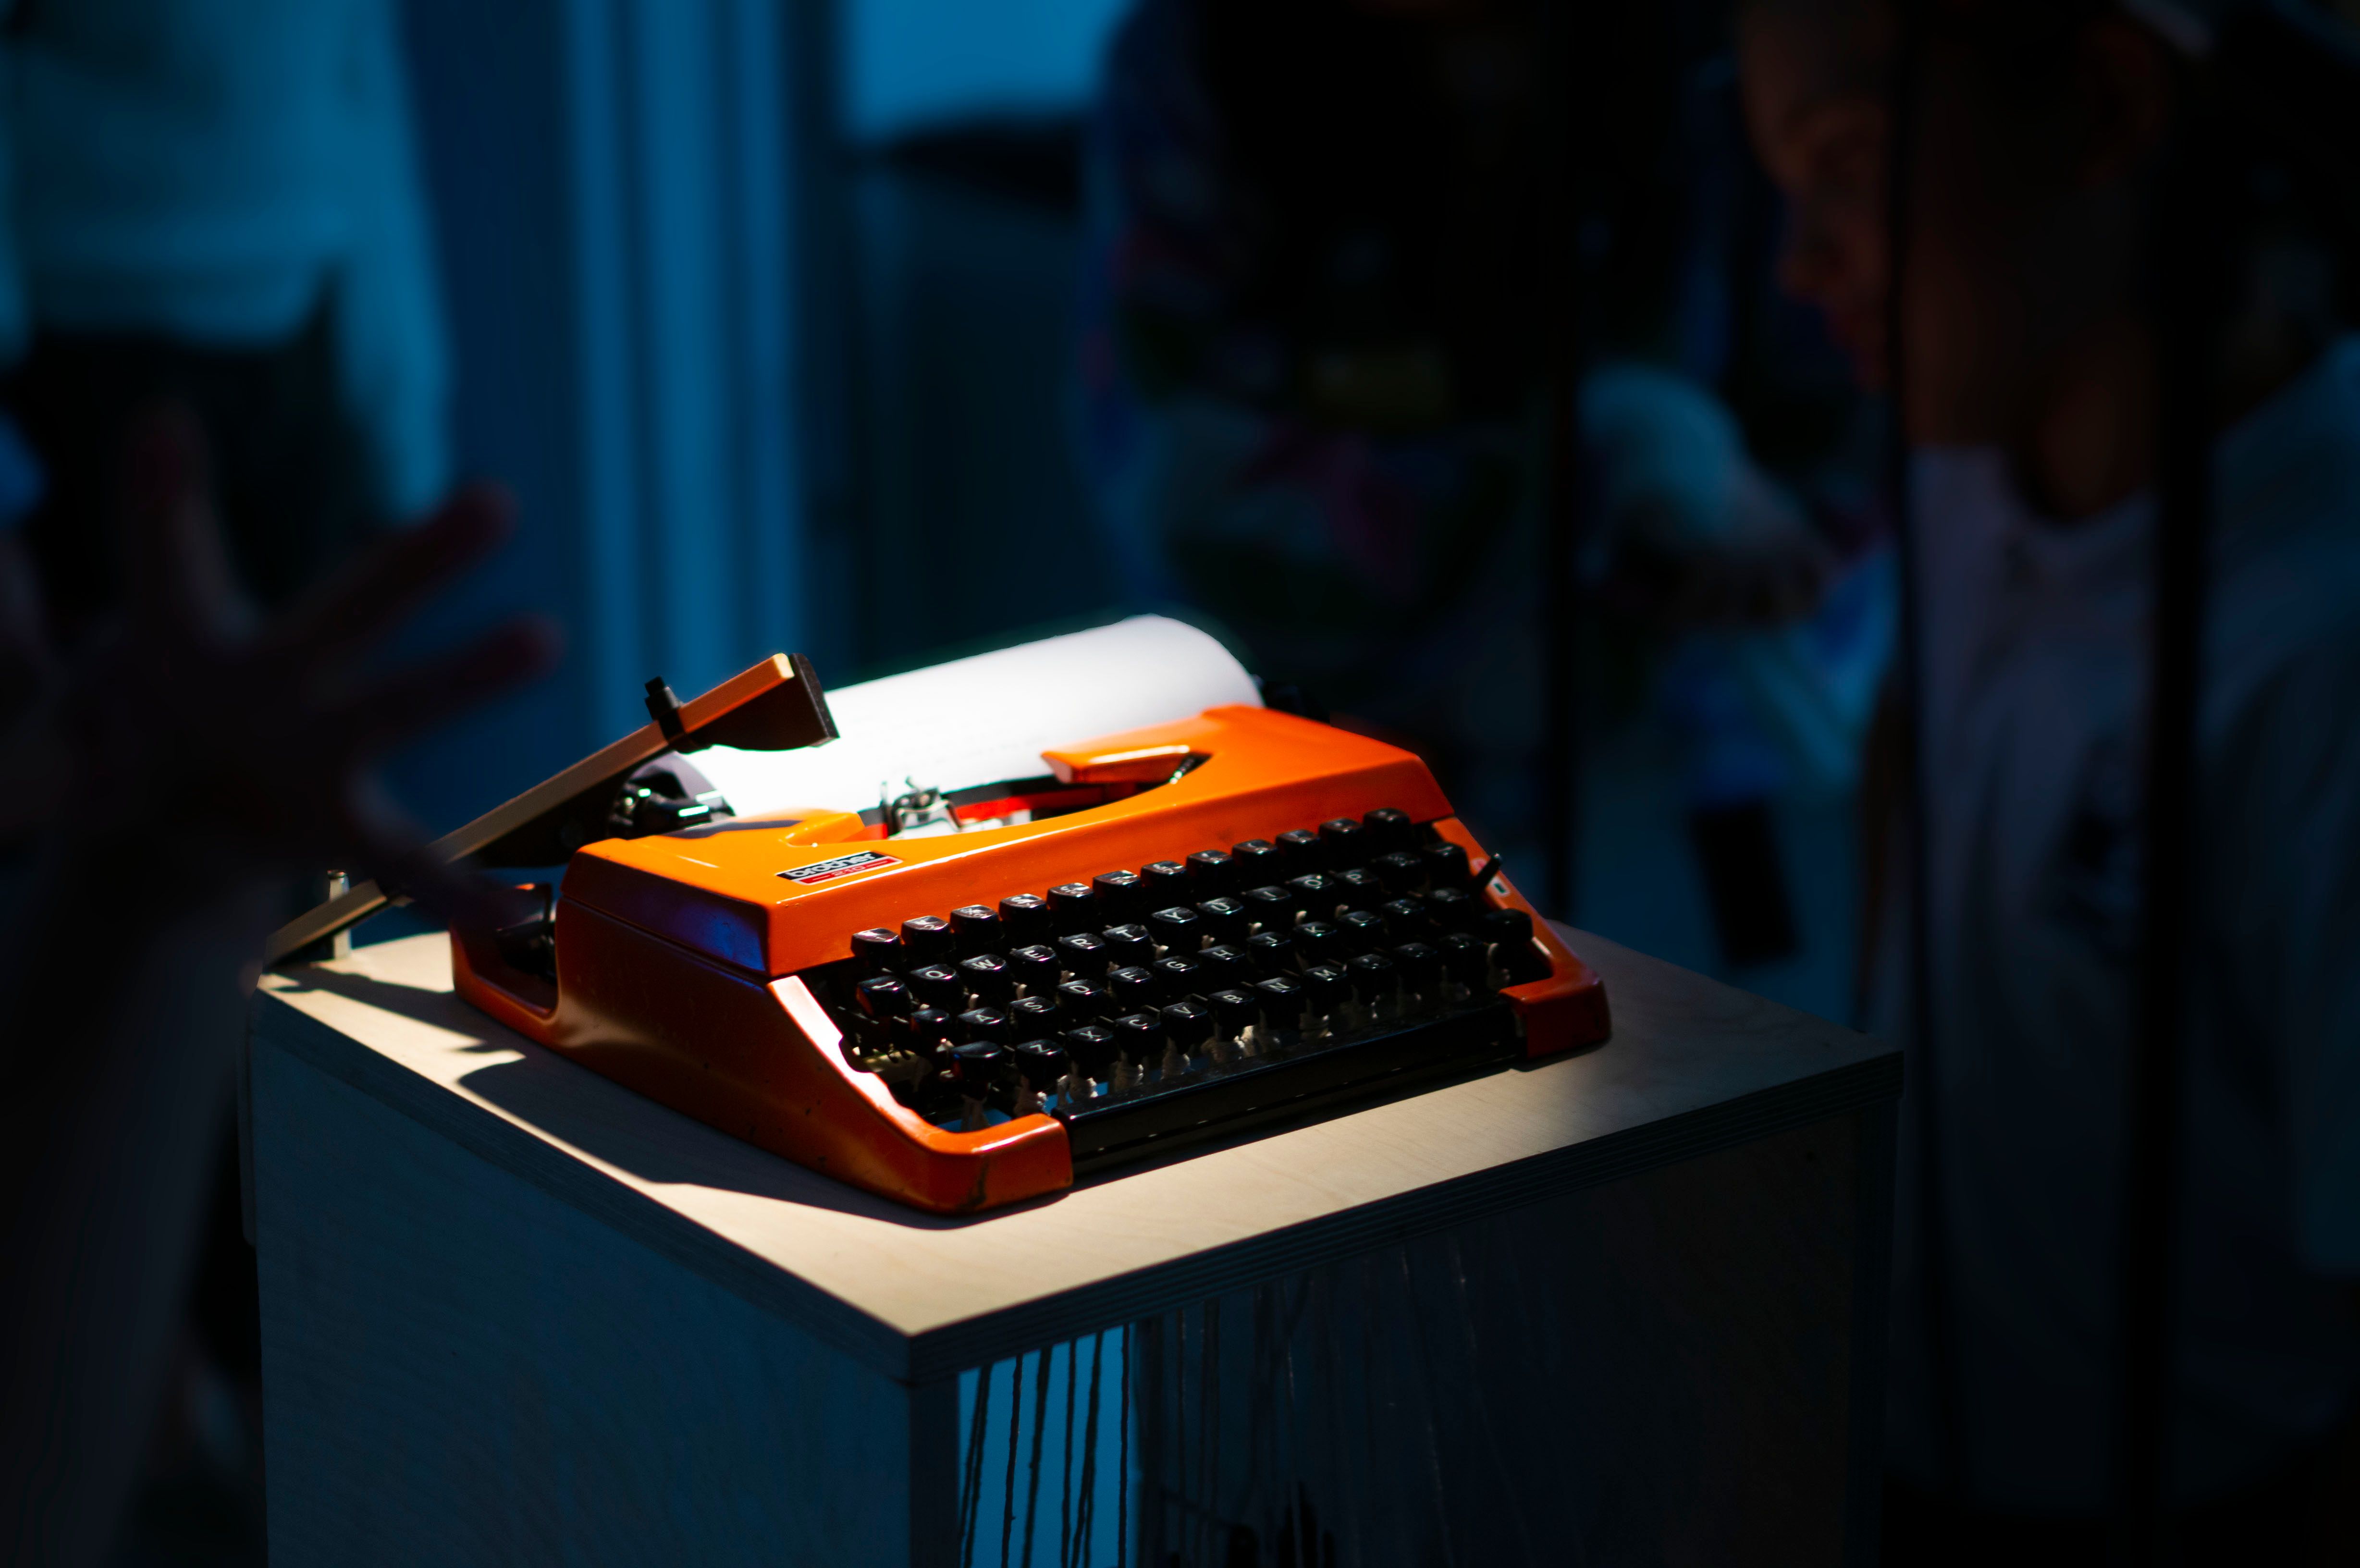 dramaticaly lit orange typewriter, with people looking at it in the background